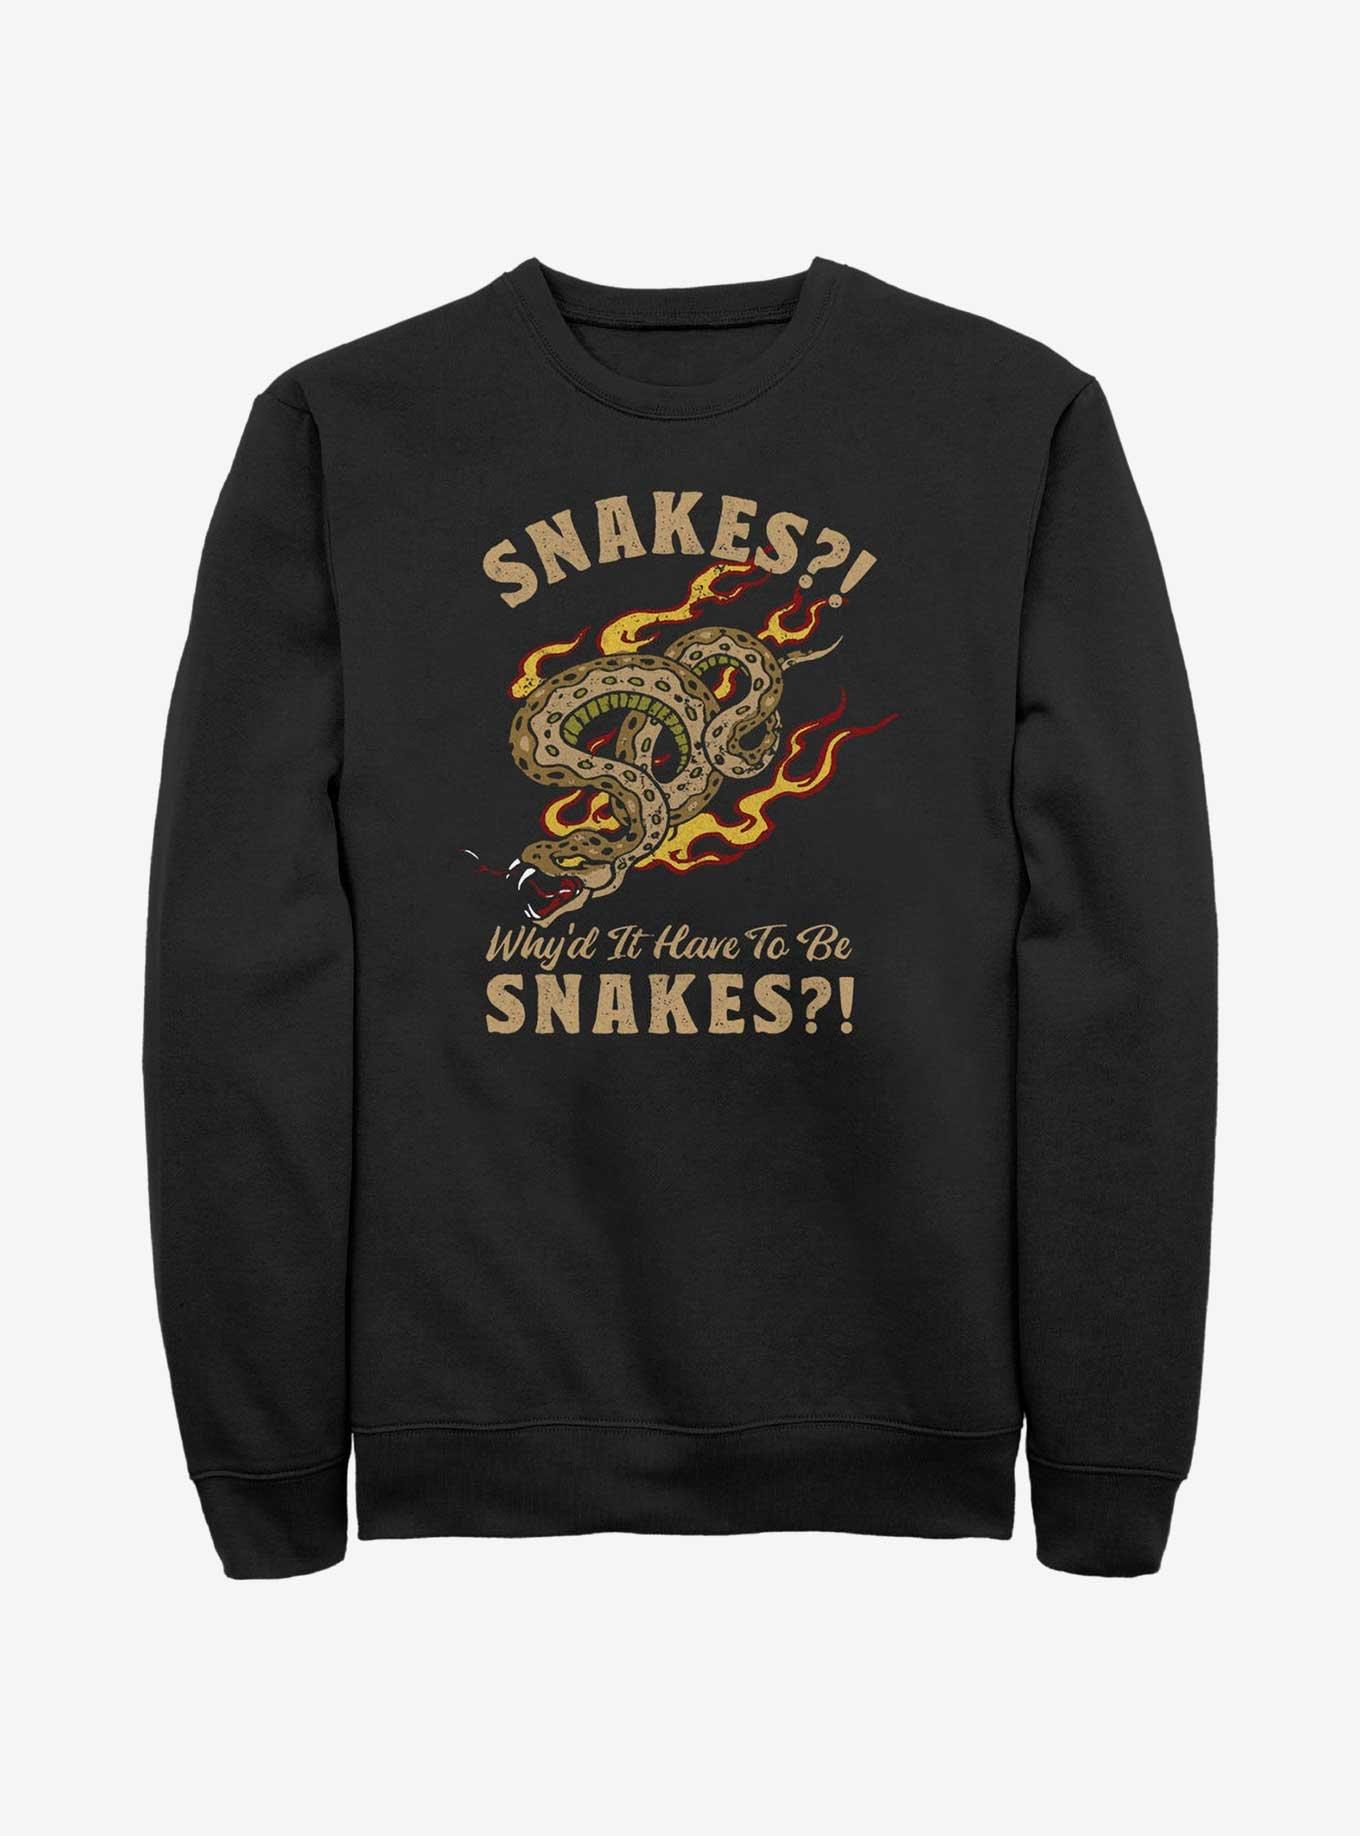 Indiana Jones Why'd It Have To Be Snakes Sweatshirt, BLACK, hi-res